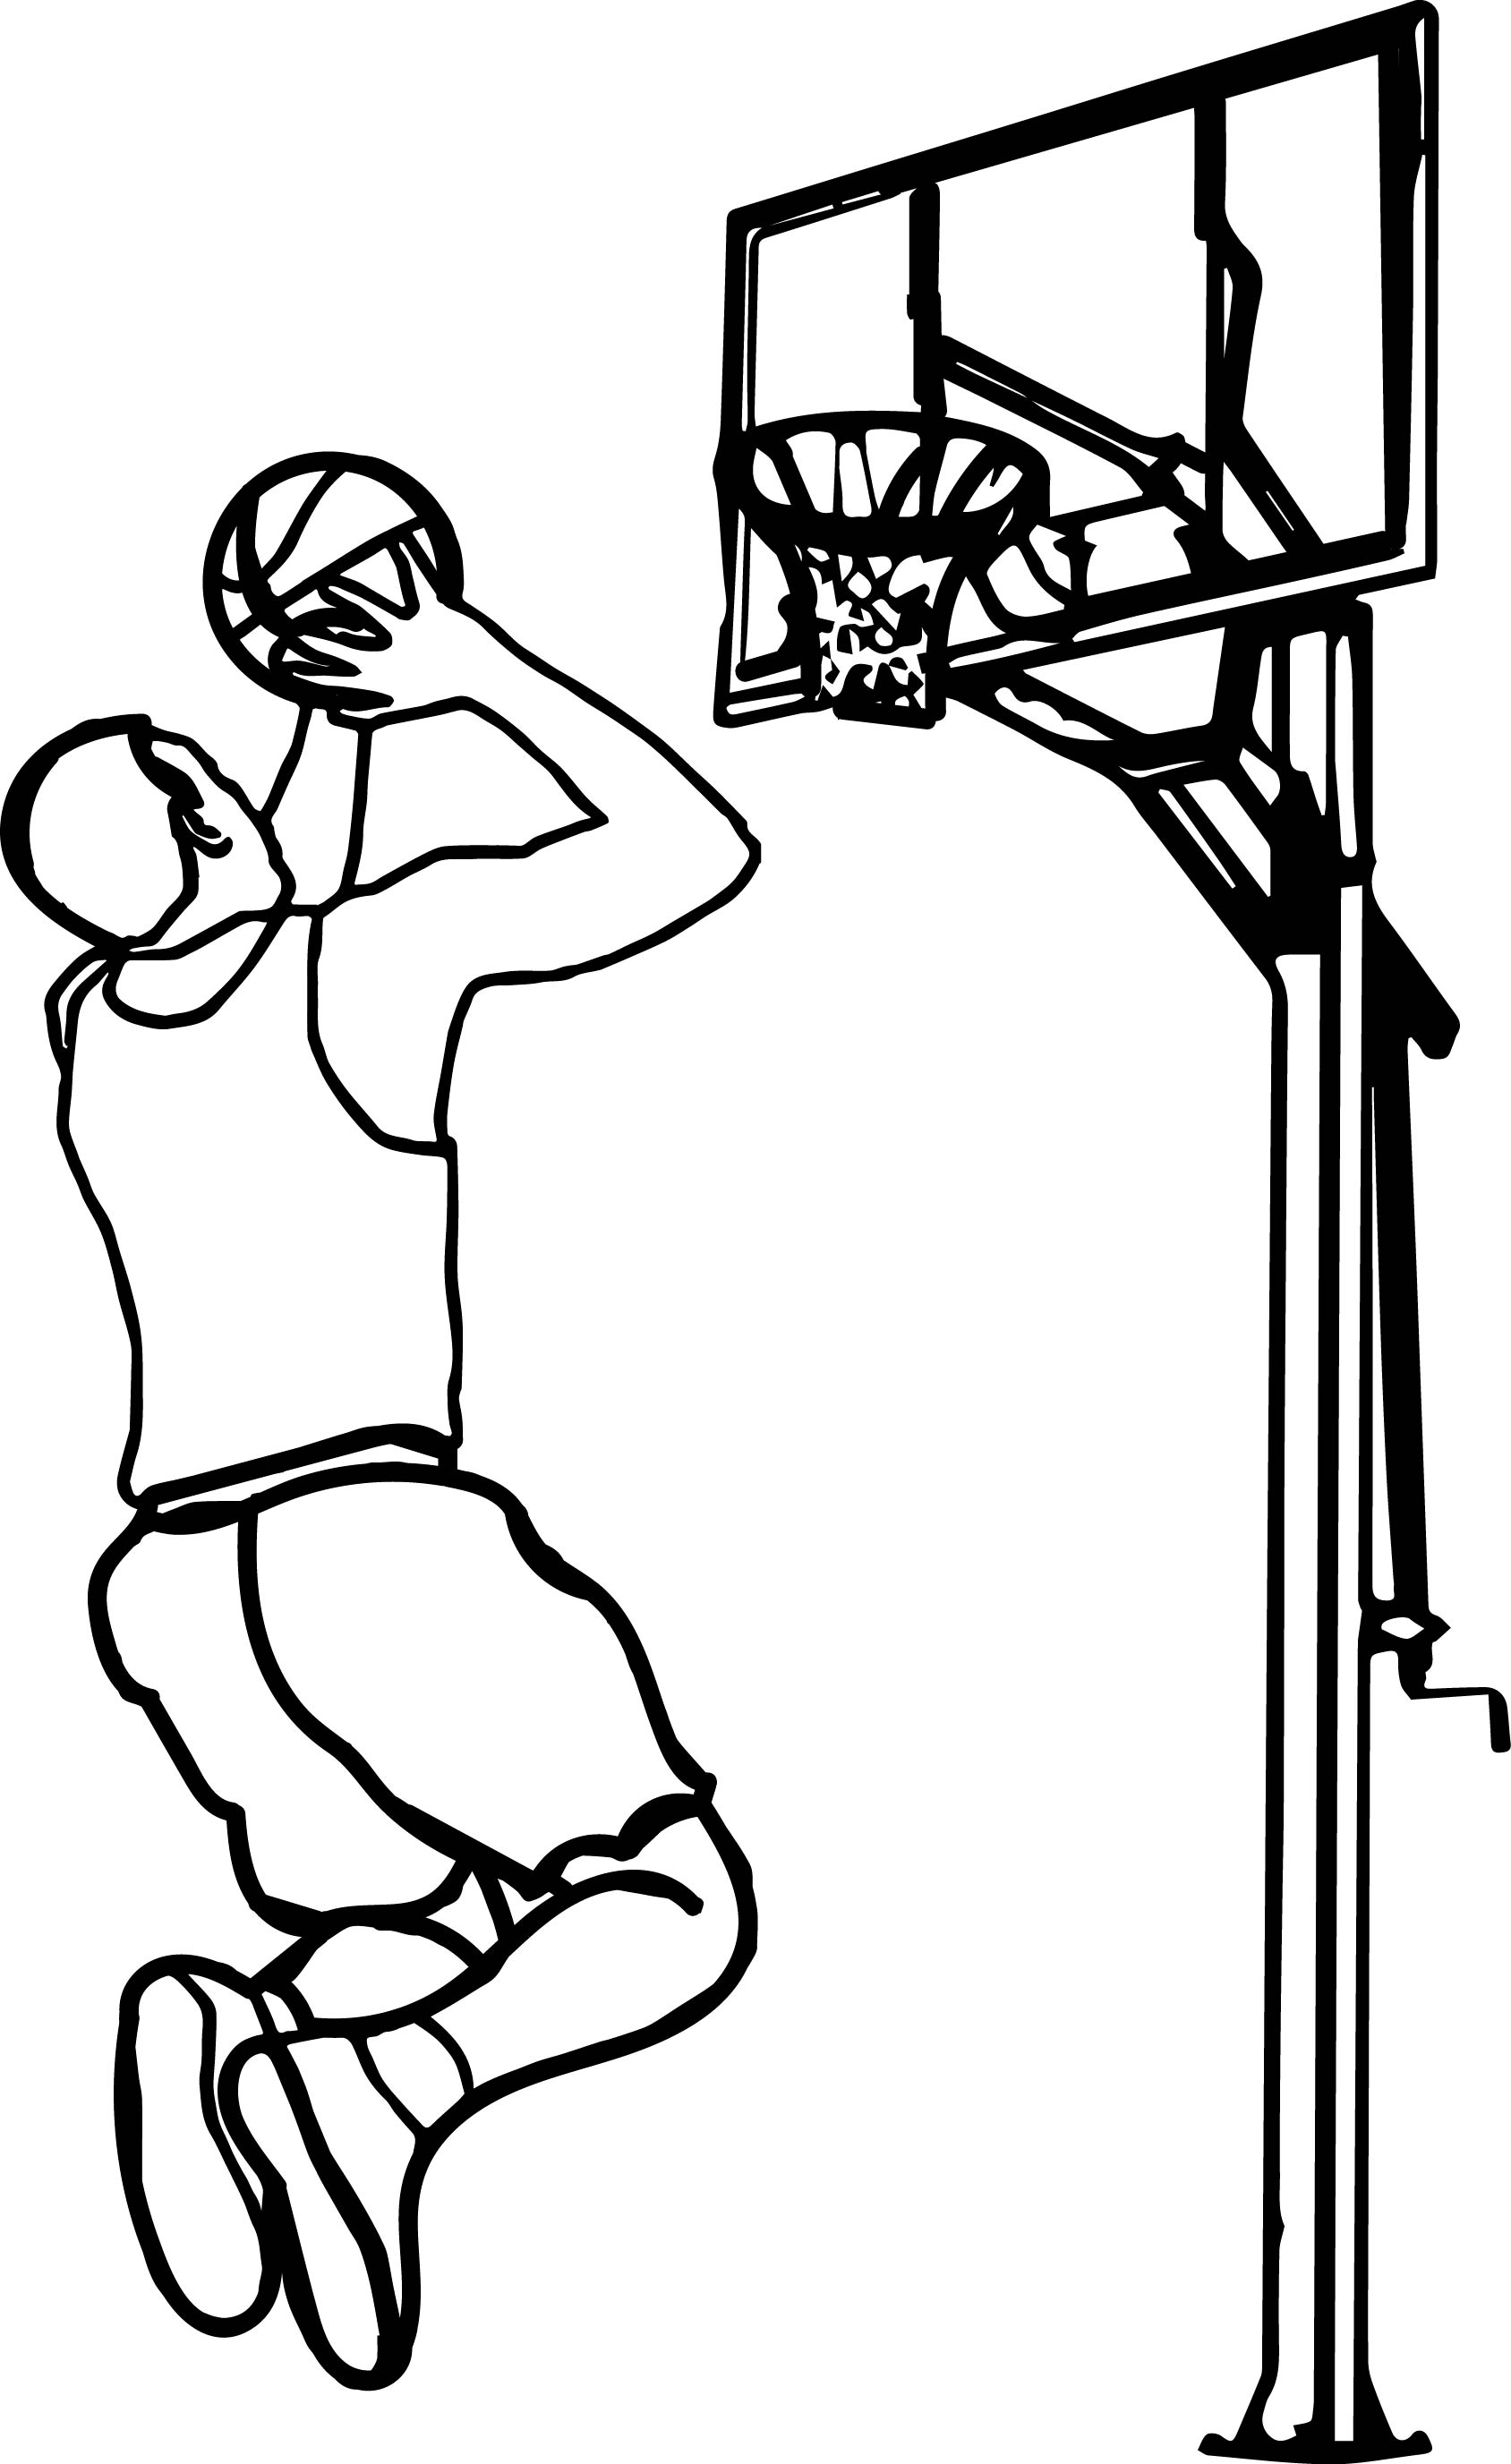 Basketball Hoop Coloring Page at GetColorings.com  Free printable colorings pages to print and 